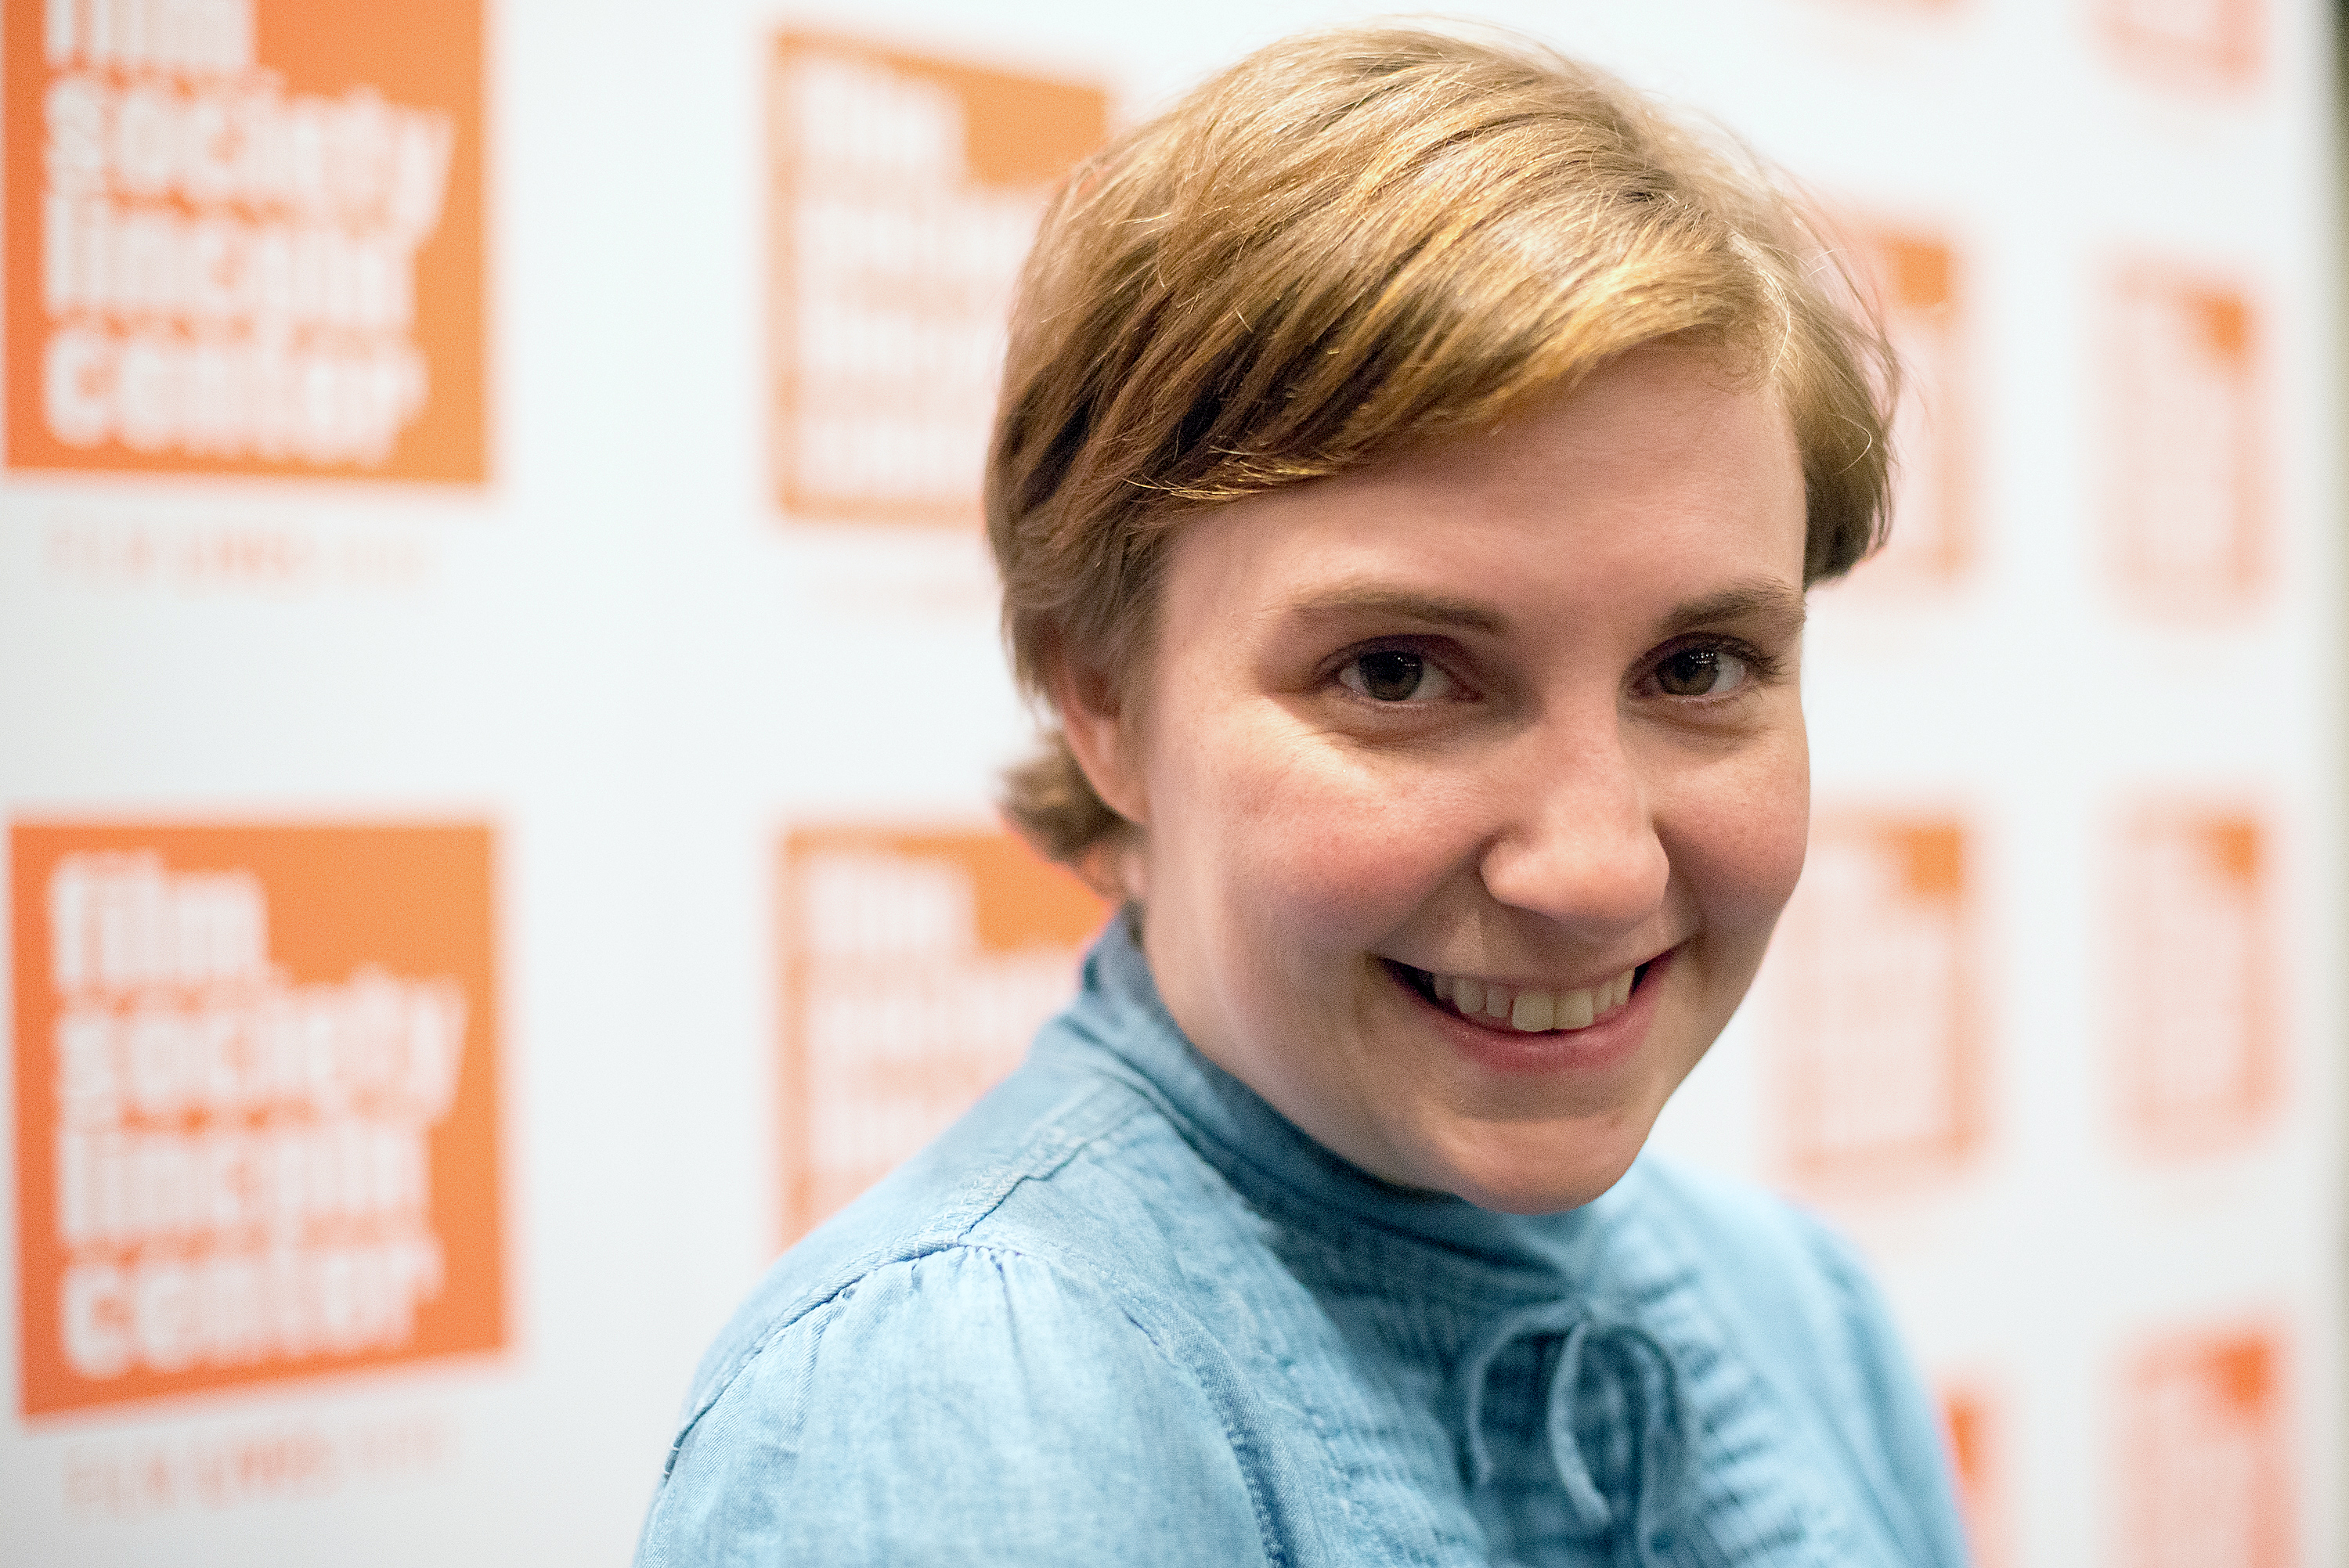 Lena Dunham at the 2015 Film Society of Lincoln Center Summer Talks on July 13, 2015  in New York City. (Mike Pont—WireImage/Getty Images)